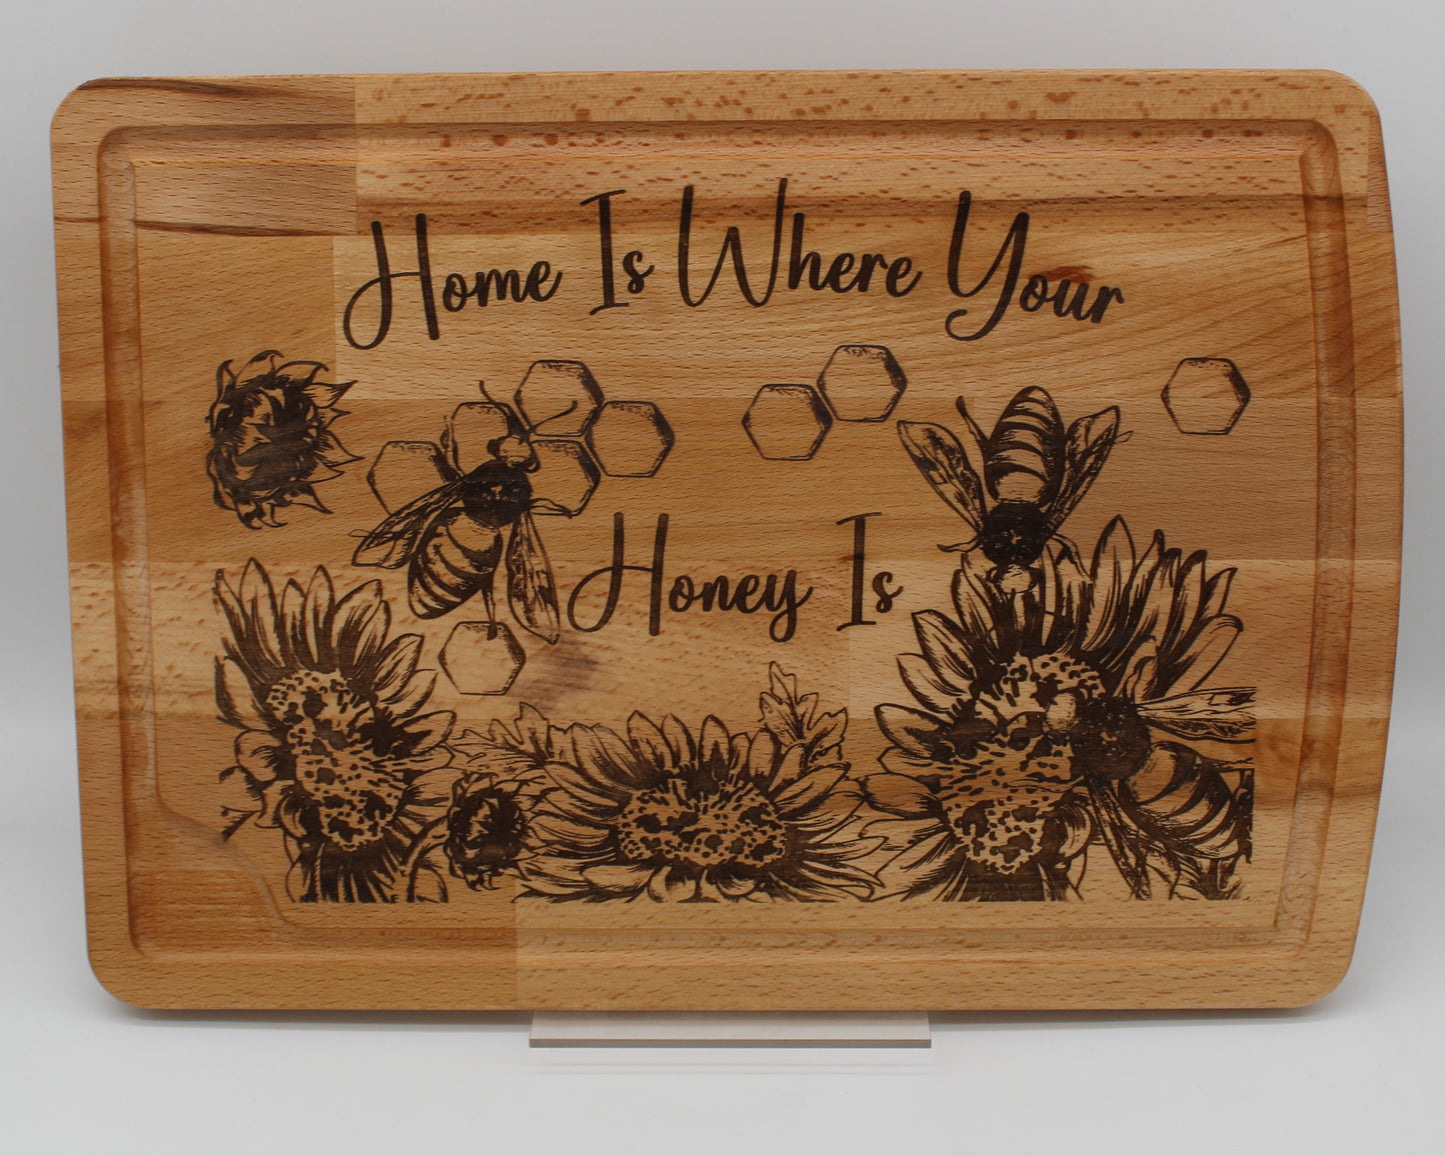 Home is where your honey is - Haisley Design